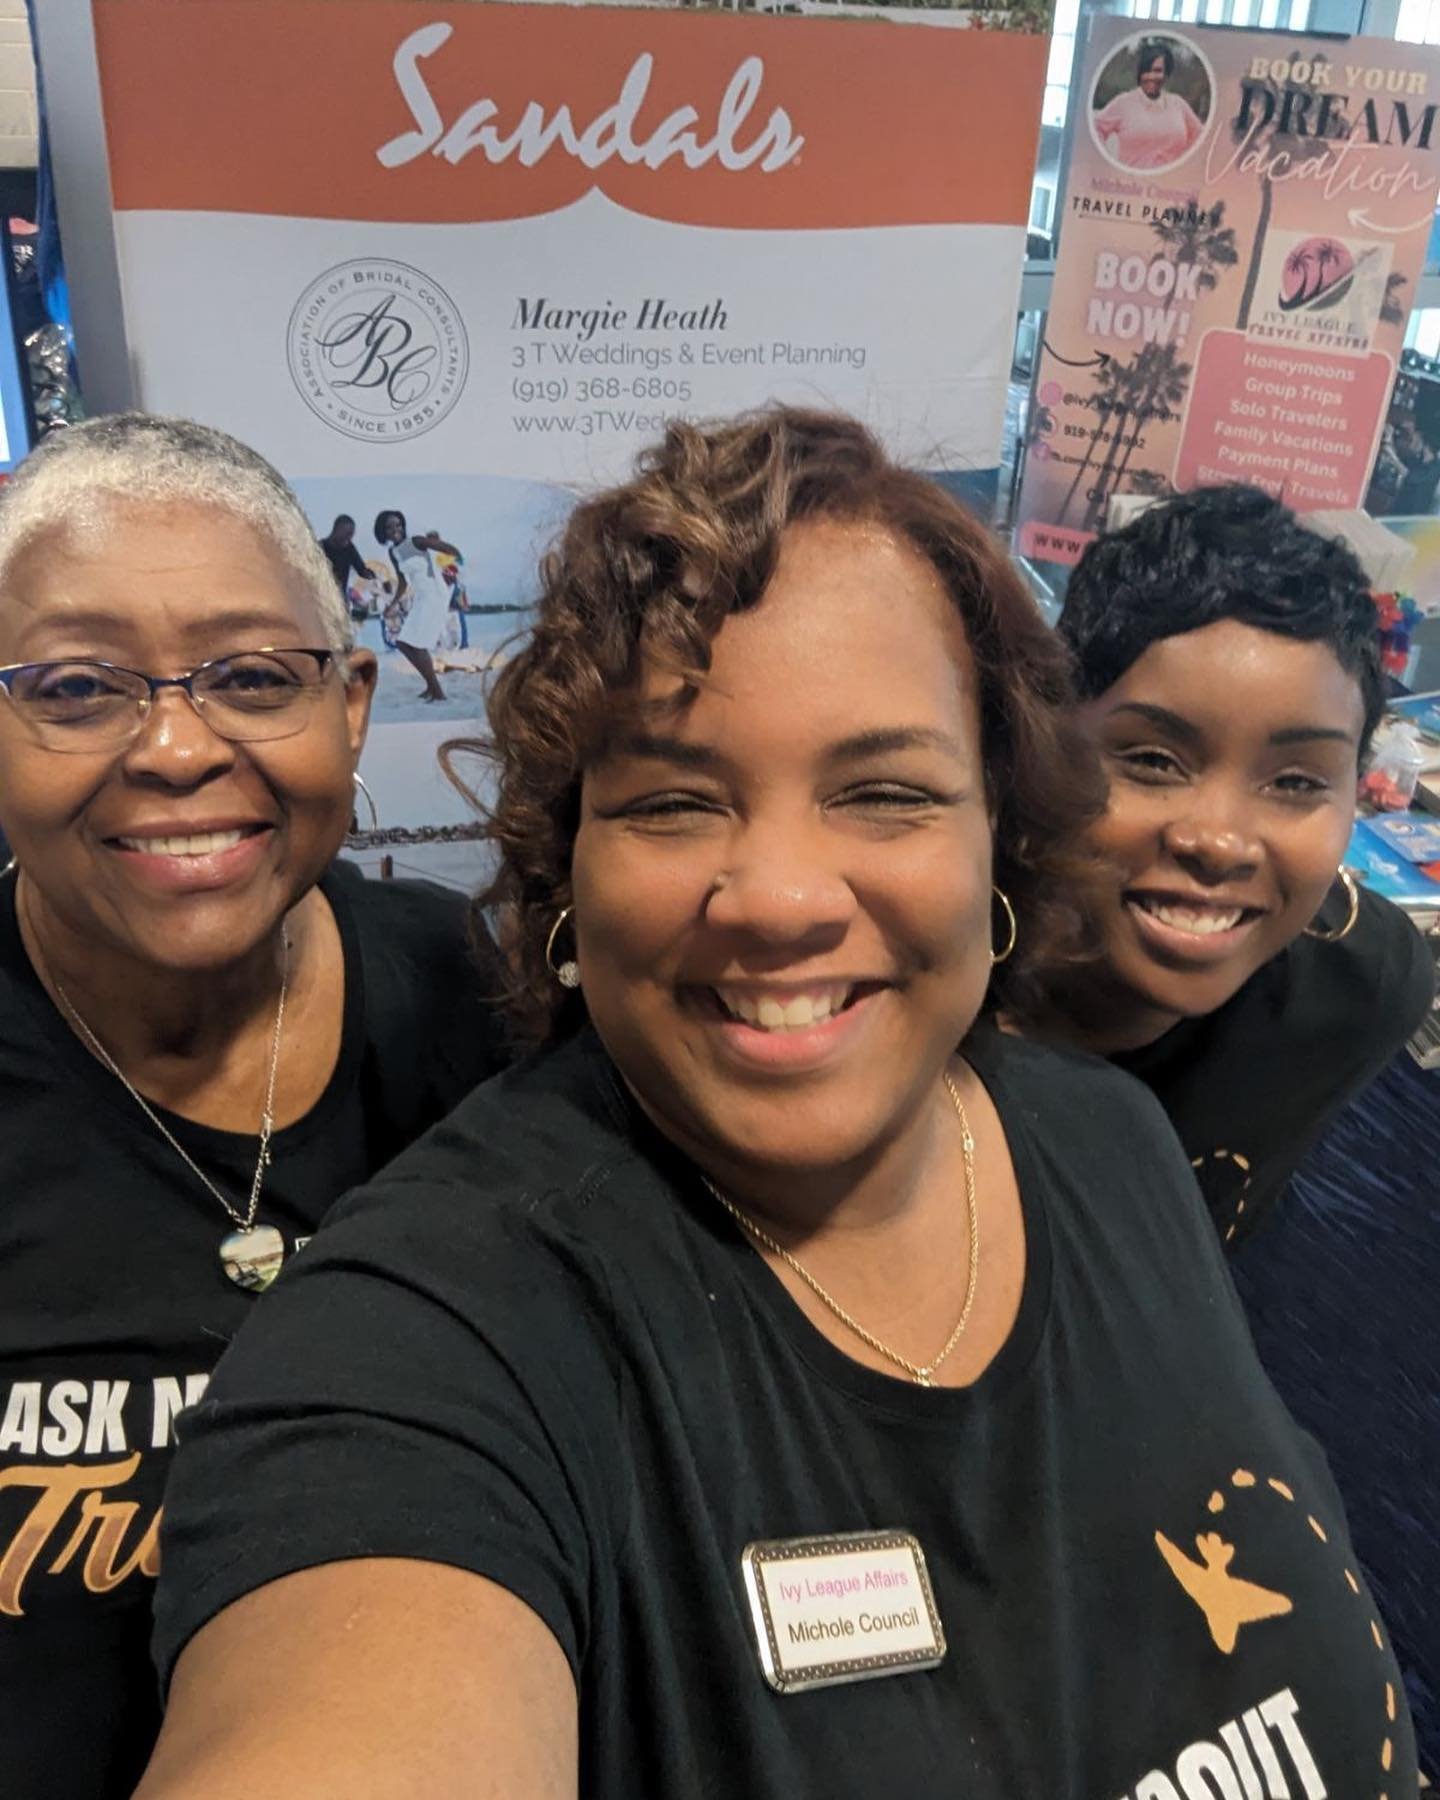 Some of our North Carolina ABC members - Leslie Finch of @simplysomethingep , Margie Heath of 3T Weddings &amp; Event Planning and Michole Council  of @ivy_league_affairs - teamed up yesterday to represent @abcassoc at the 2024 Women&rsquo;s Empowerm